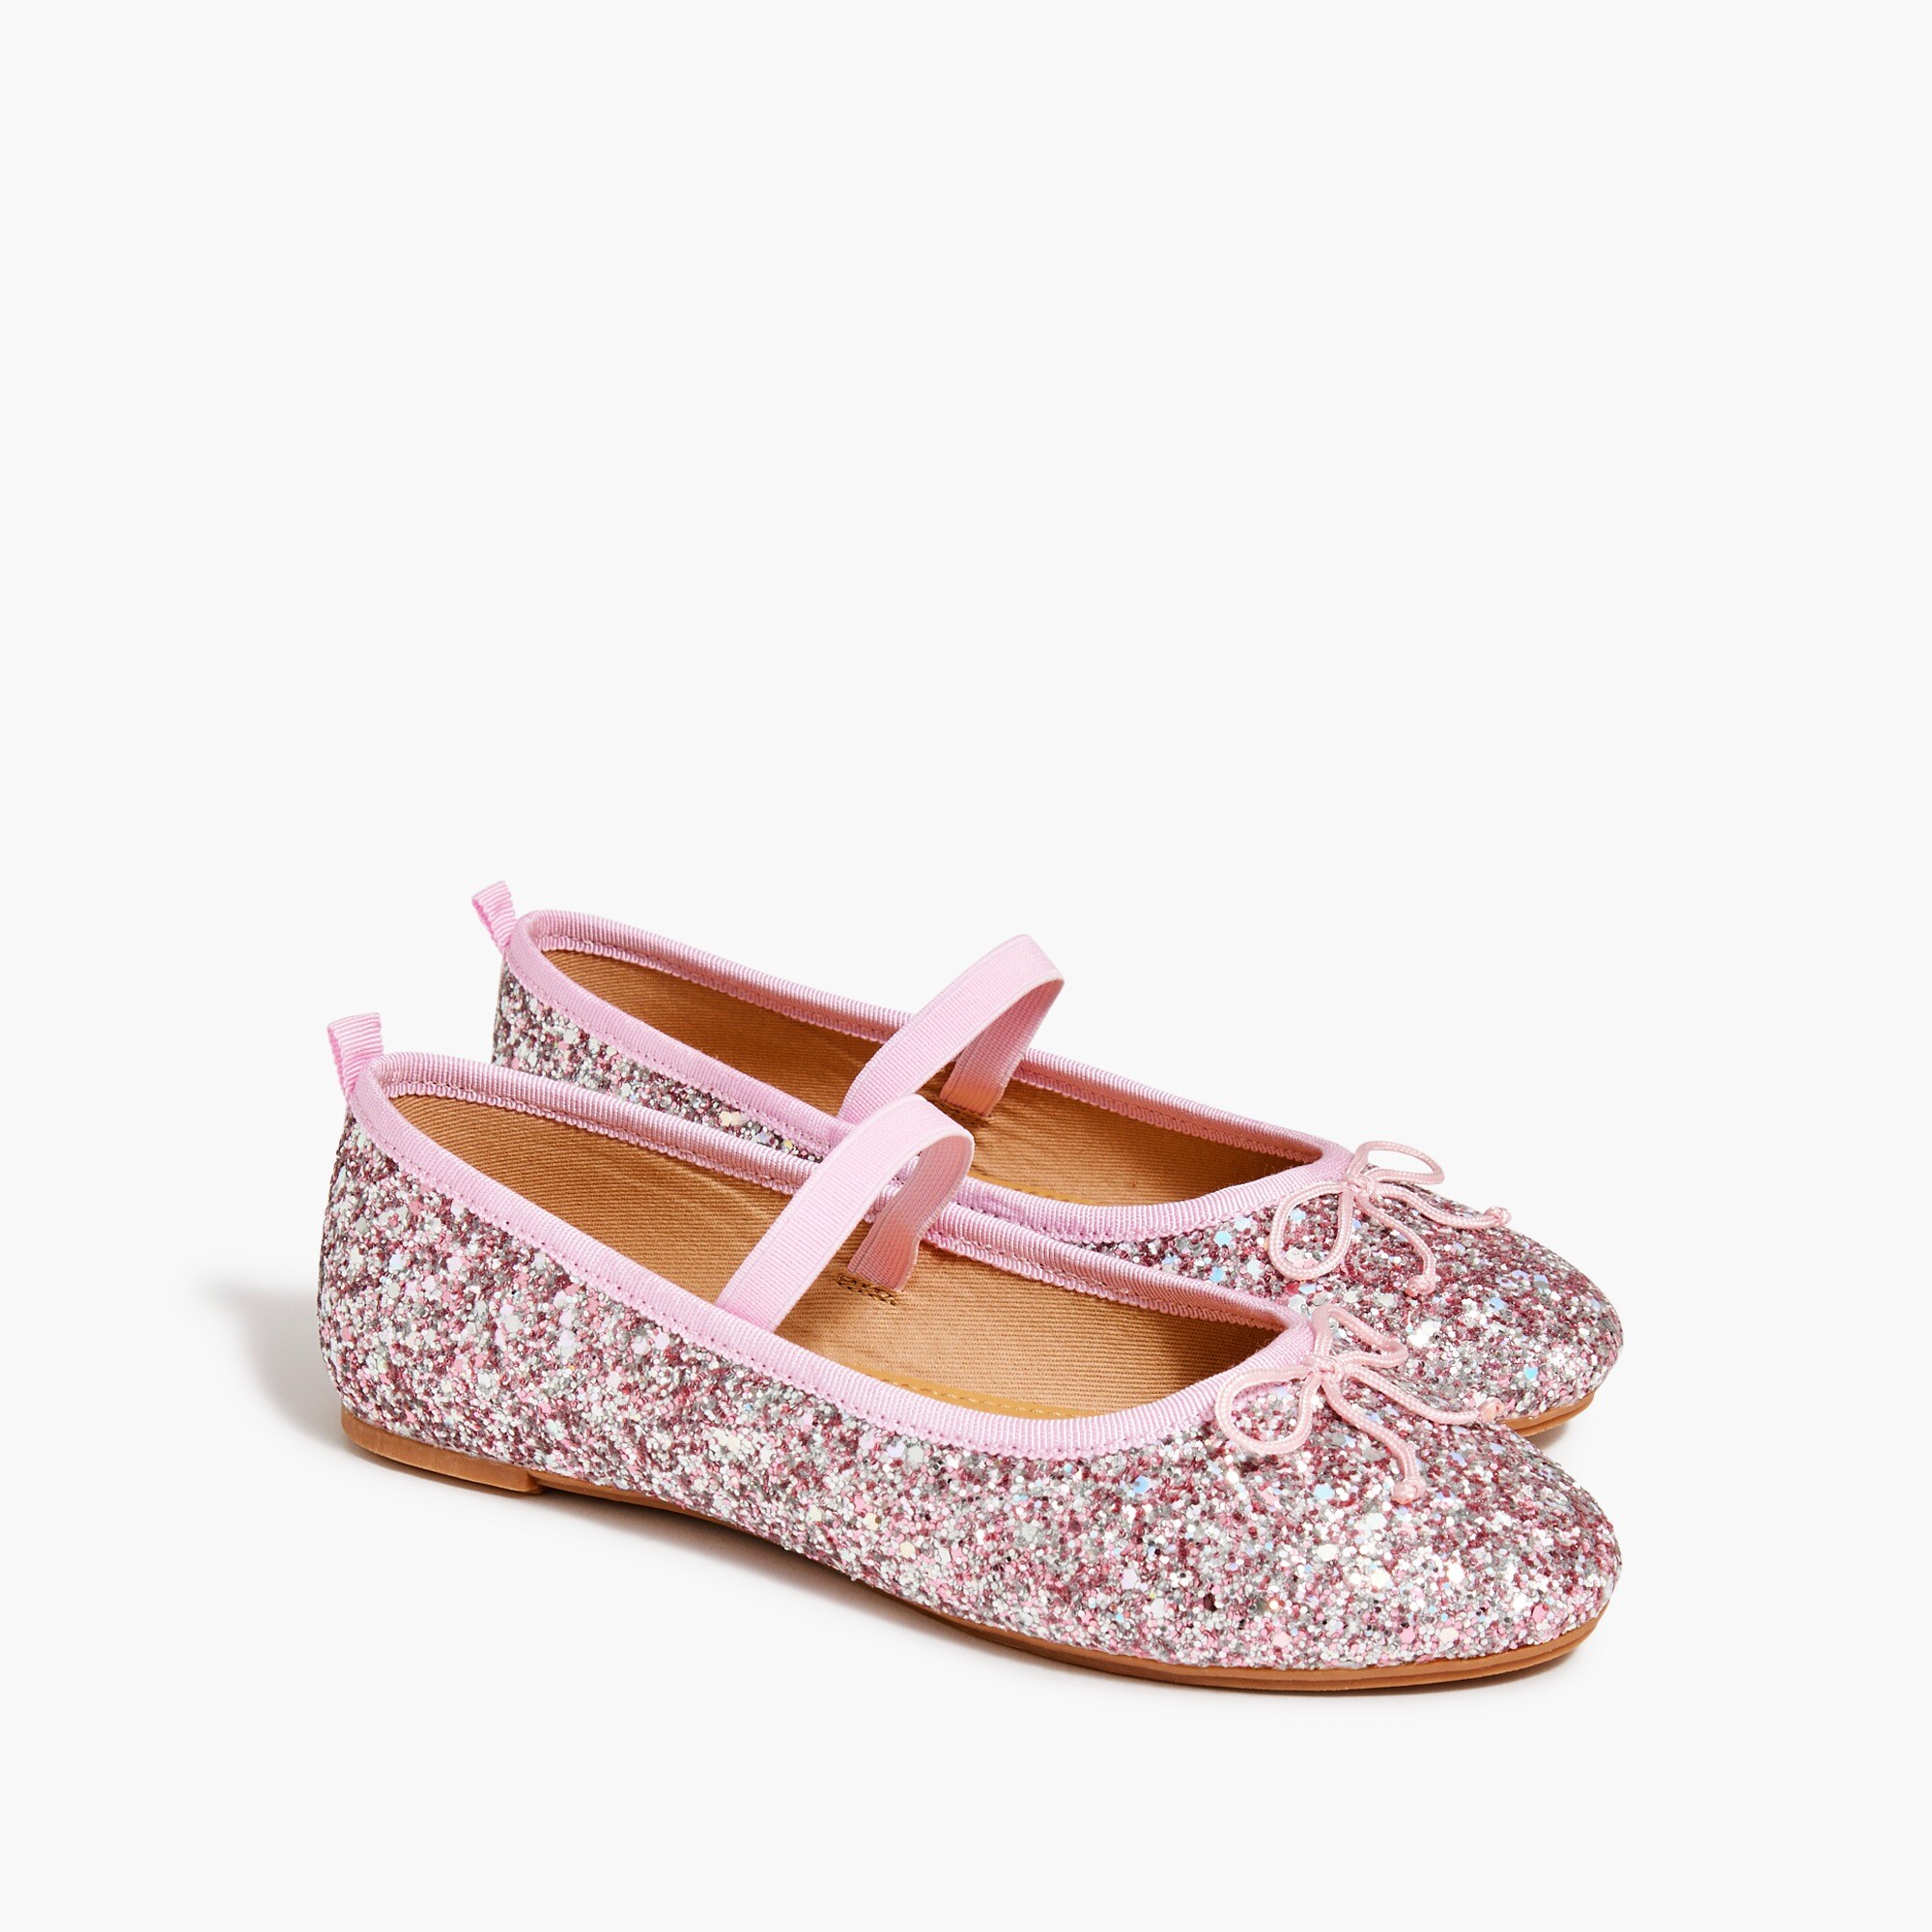  Girls' glitter Mary Janes with elastic strap